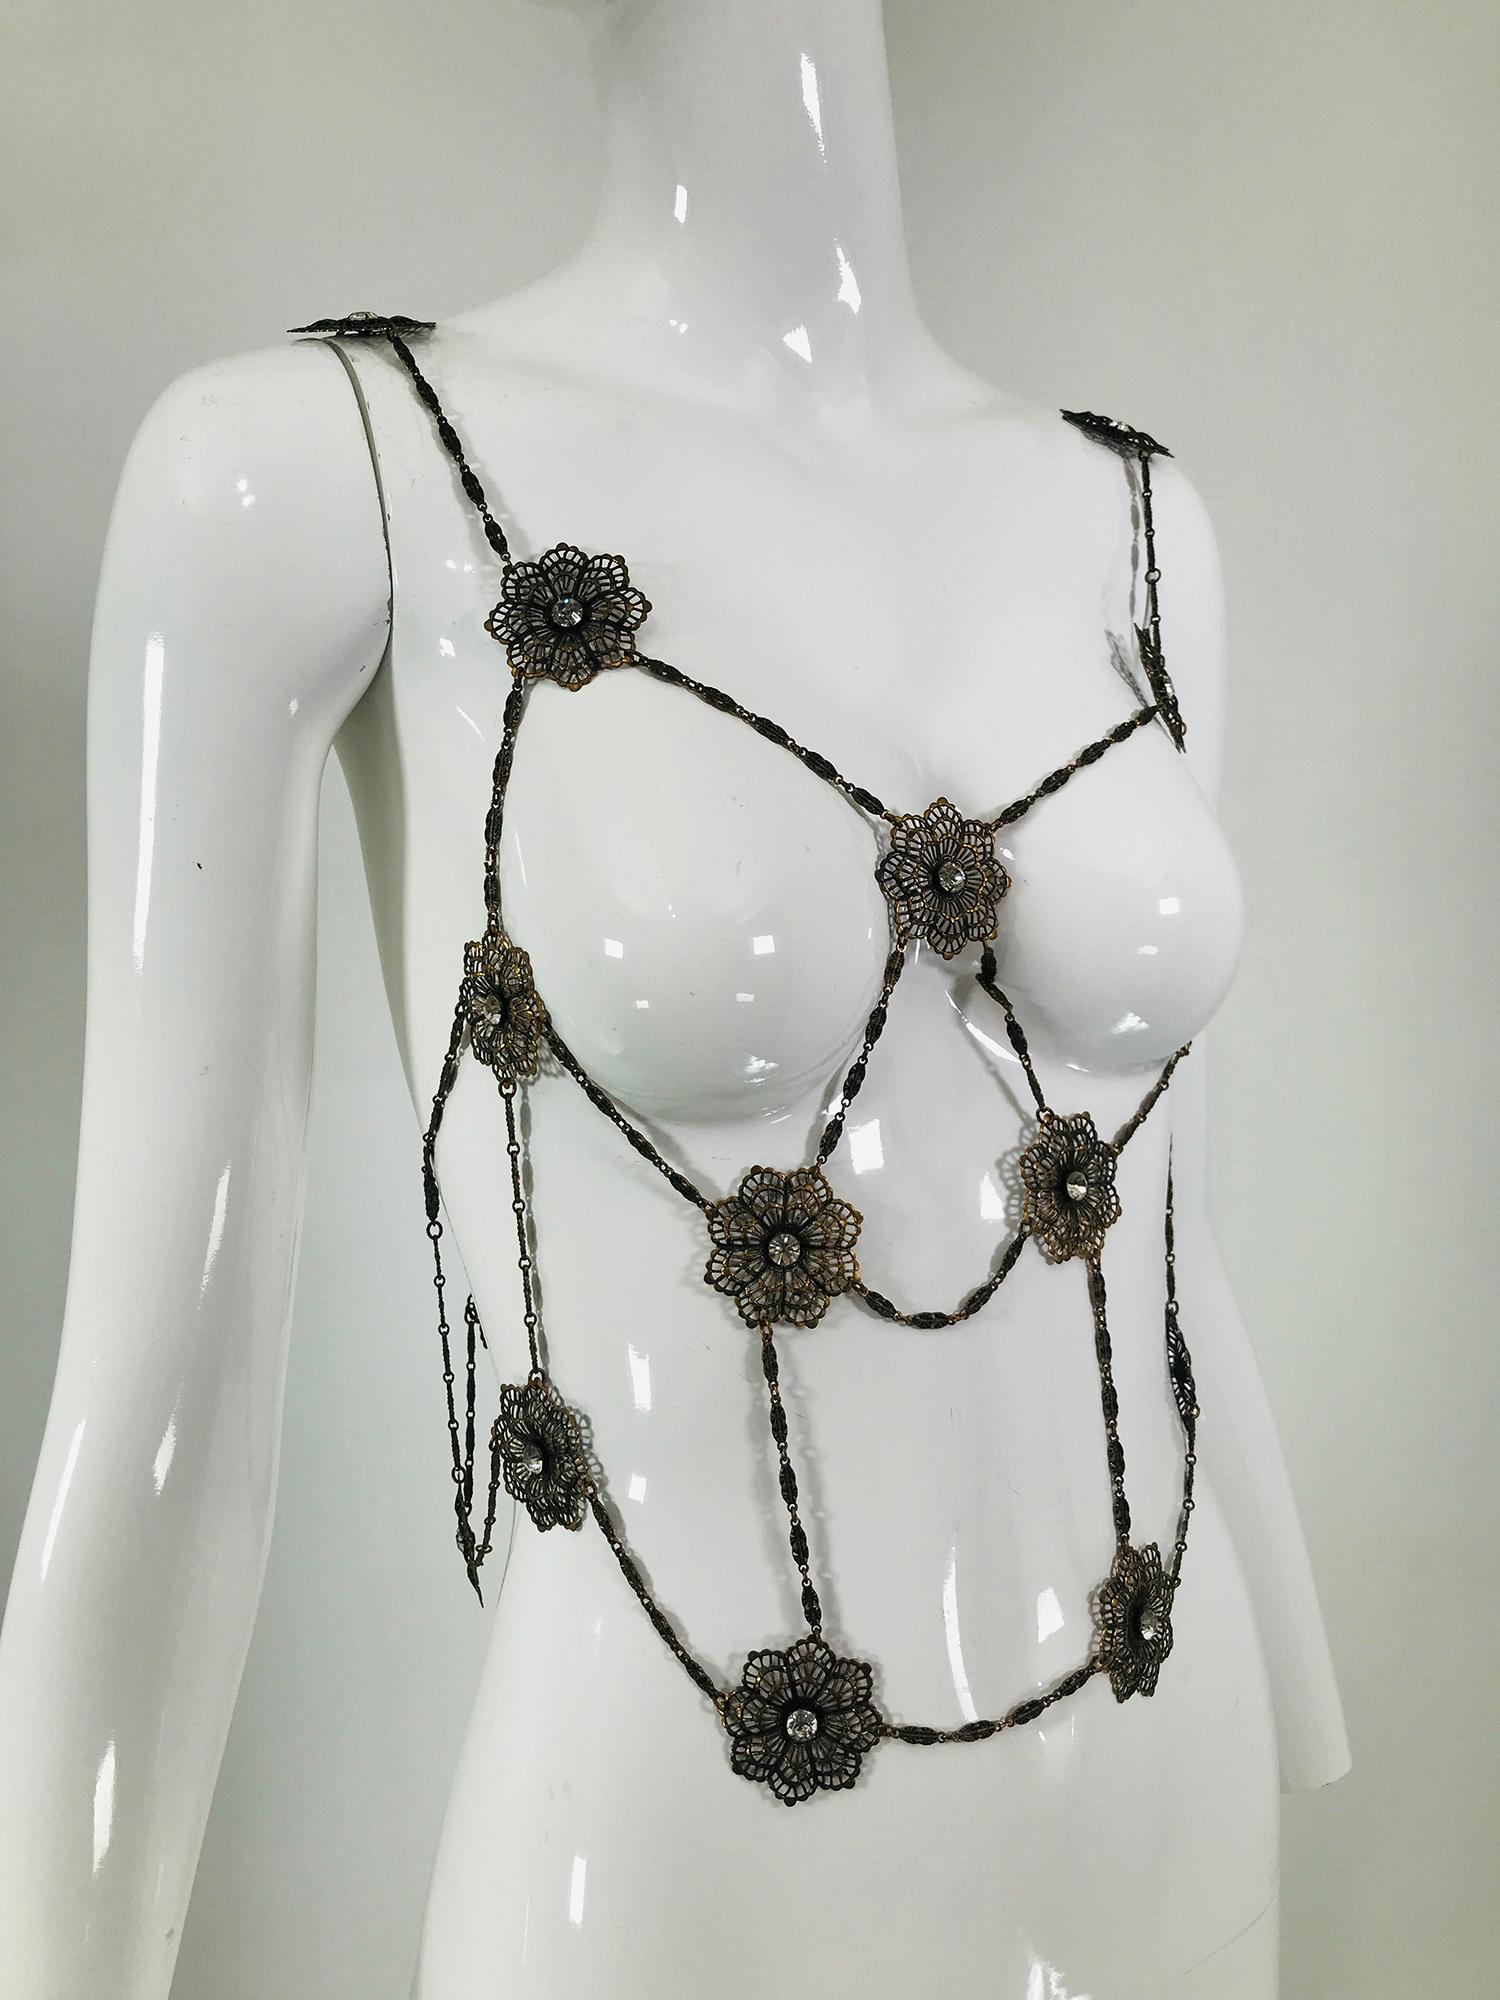 Vintage body jewelry, filigree brass & rhinestone bolero from the 1970s.  Decorative chain with round filigree brass circles that are prong set with crystal rhinestones at the center. The bolero top is the perfect thing to wear over a plain black